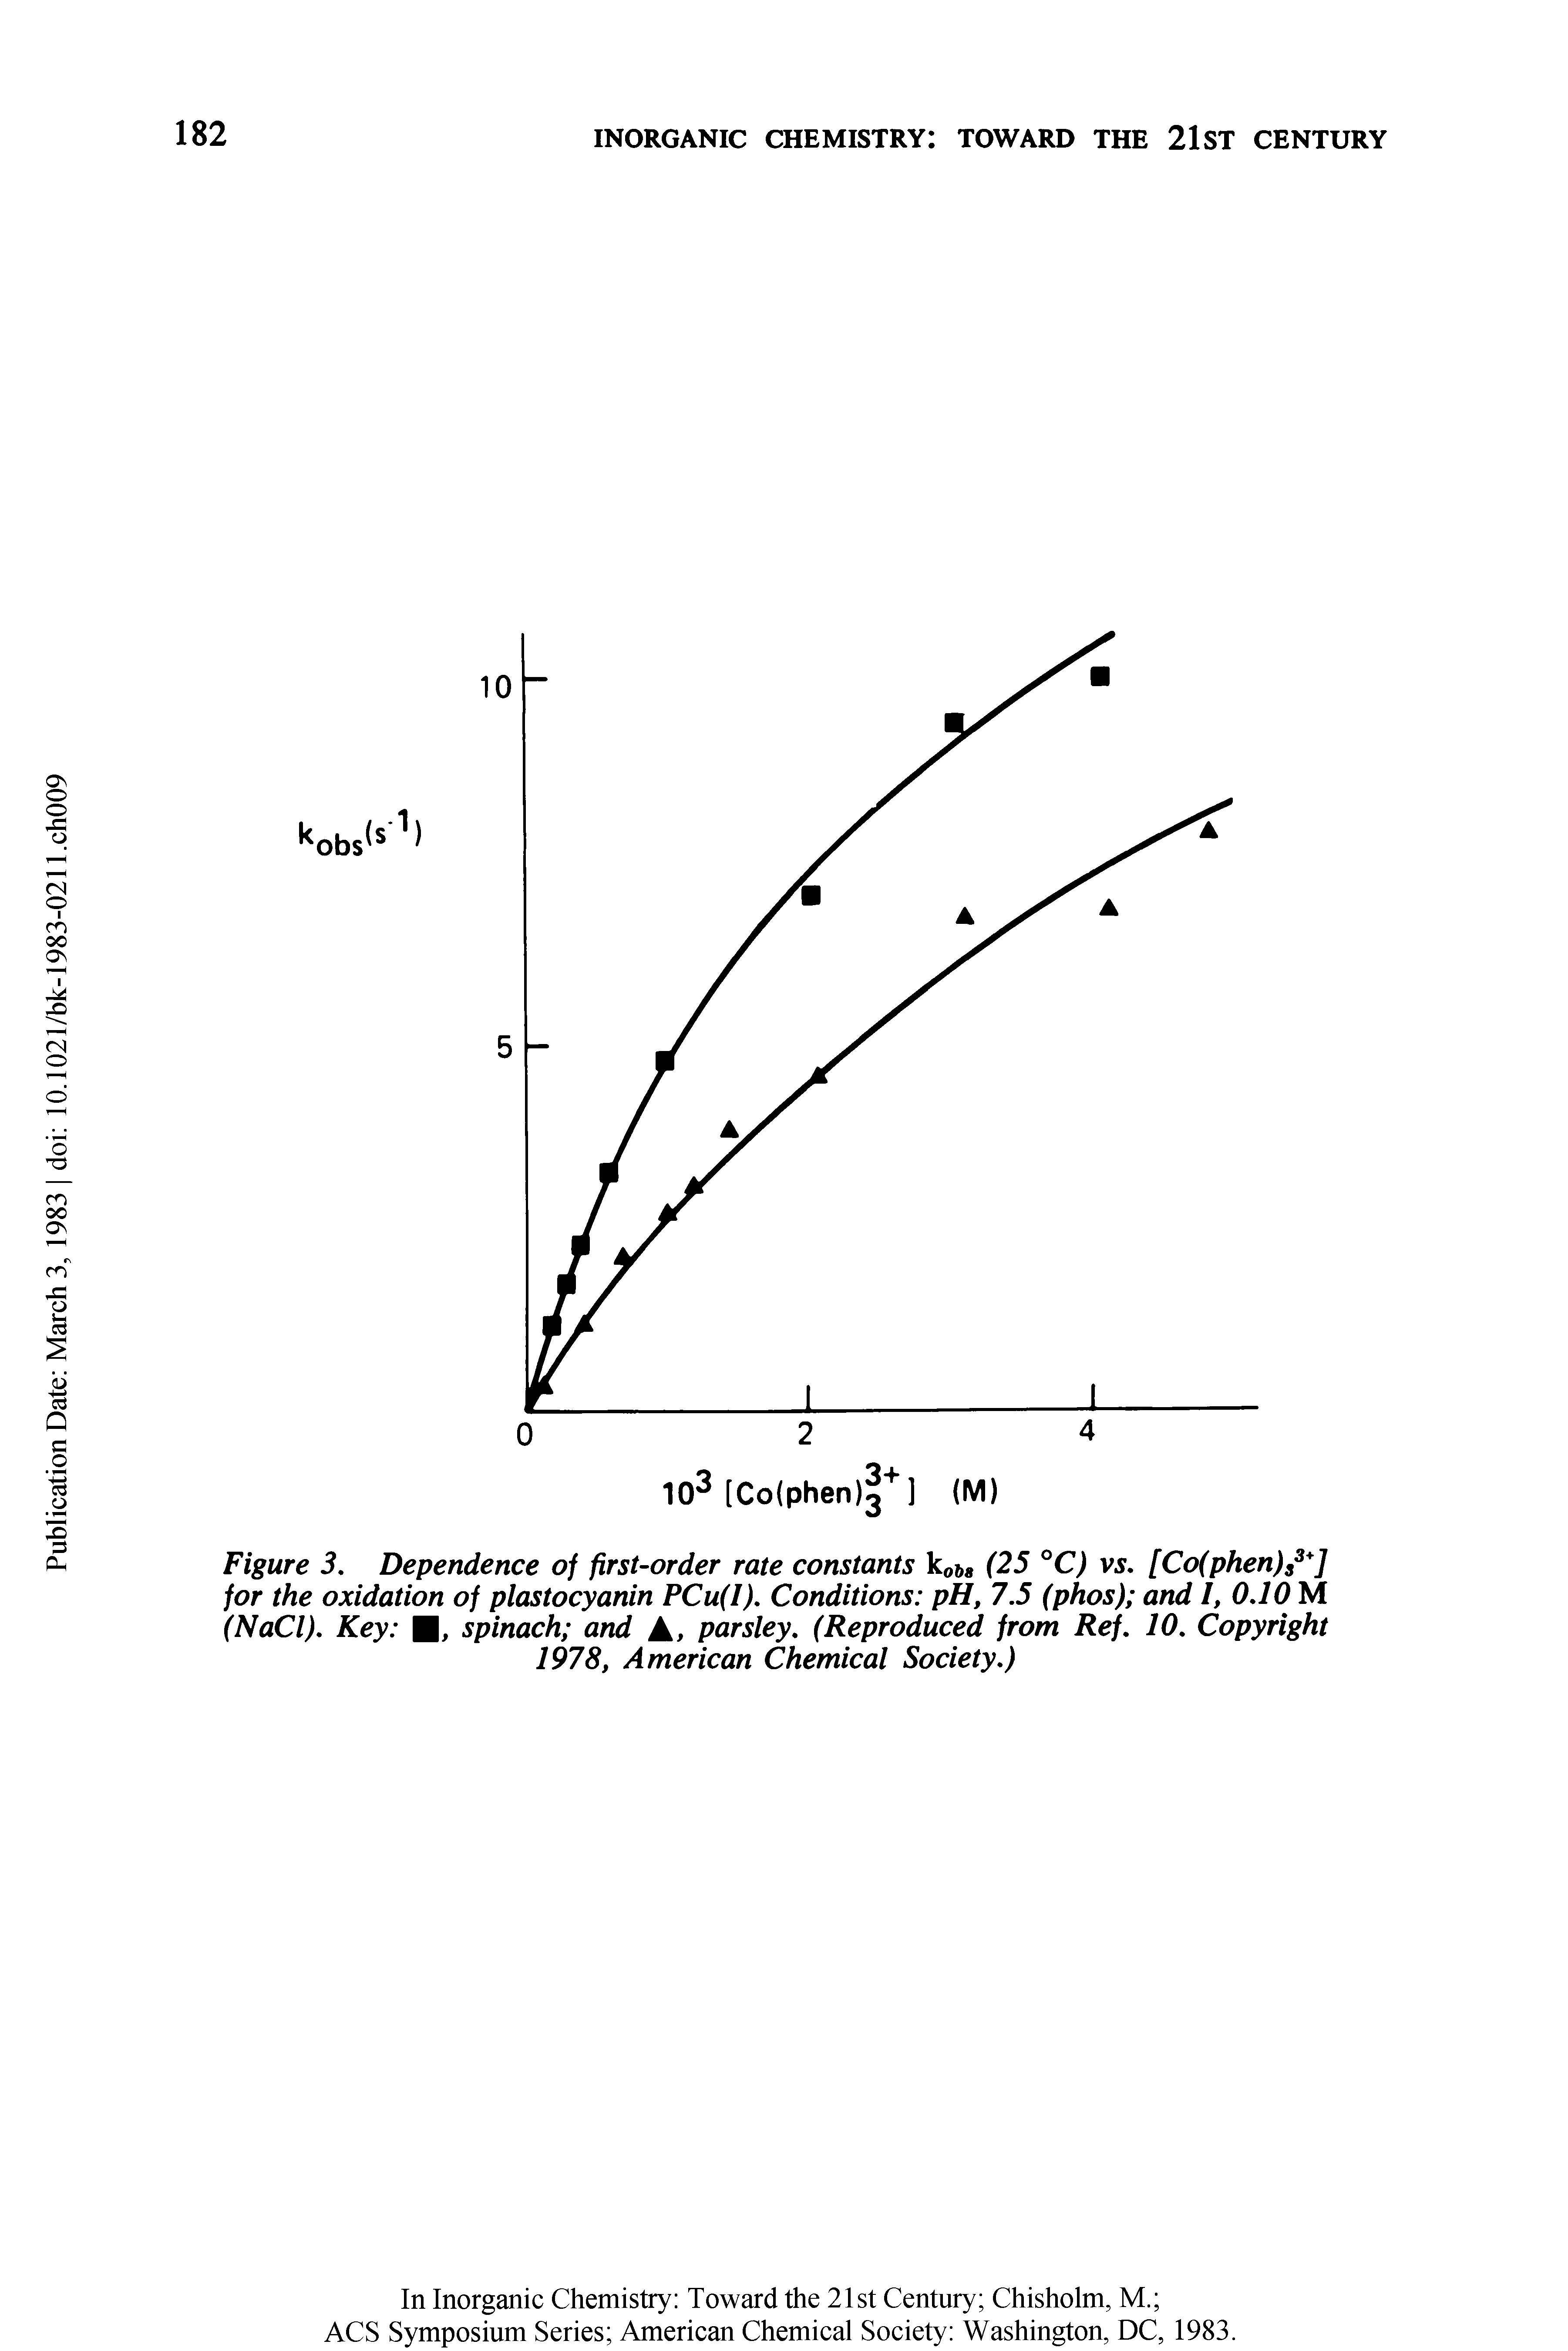 Figure 3. Dependence of first-order rate constants ko6, (25 °C) vs. [Co(phen)s3+] for the oxidation of plastocyanin PCu(I). Conditions pH, 7.5 (phos) and I, 0.10 M (NaCl). Key , spinach and A, parsley. (Reproduced from Ref. 10. Copyright 1978, American Chemical Society.)...